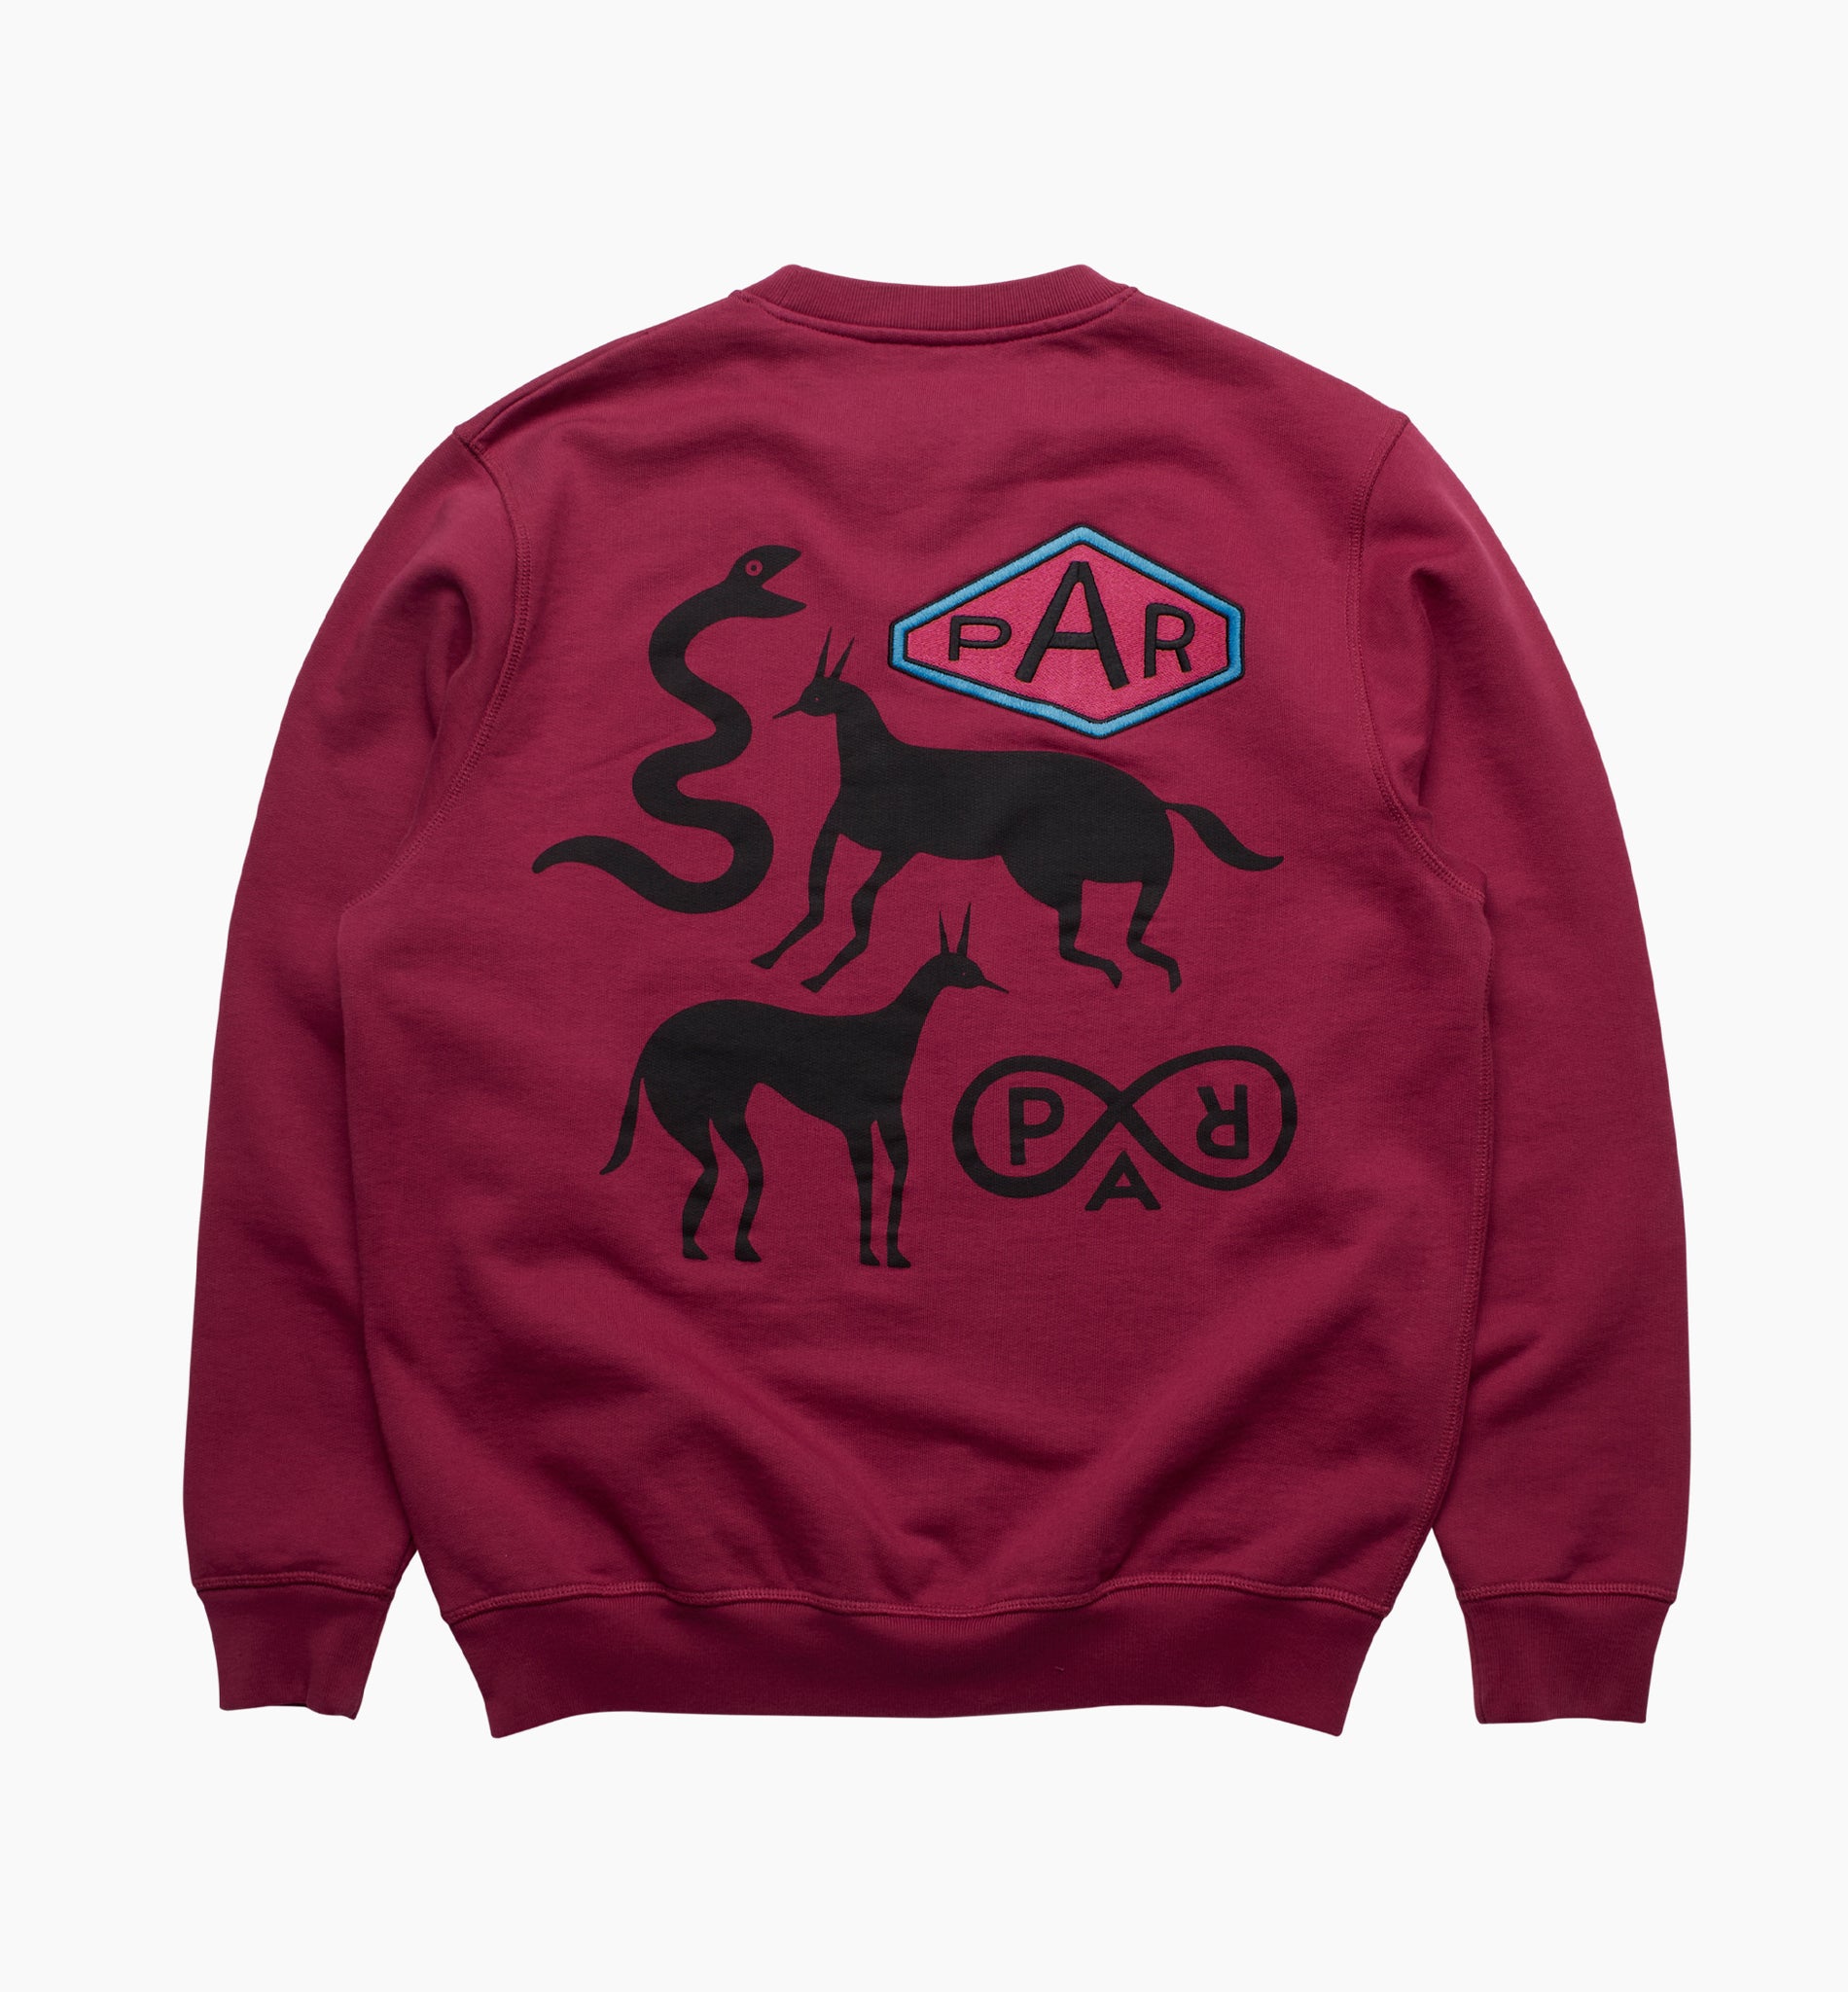 Snaked by a Horse Crew Neck Sweatshirt